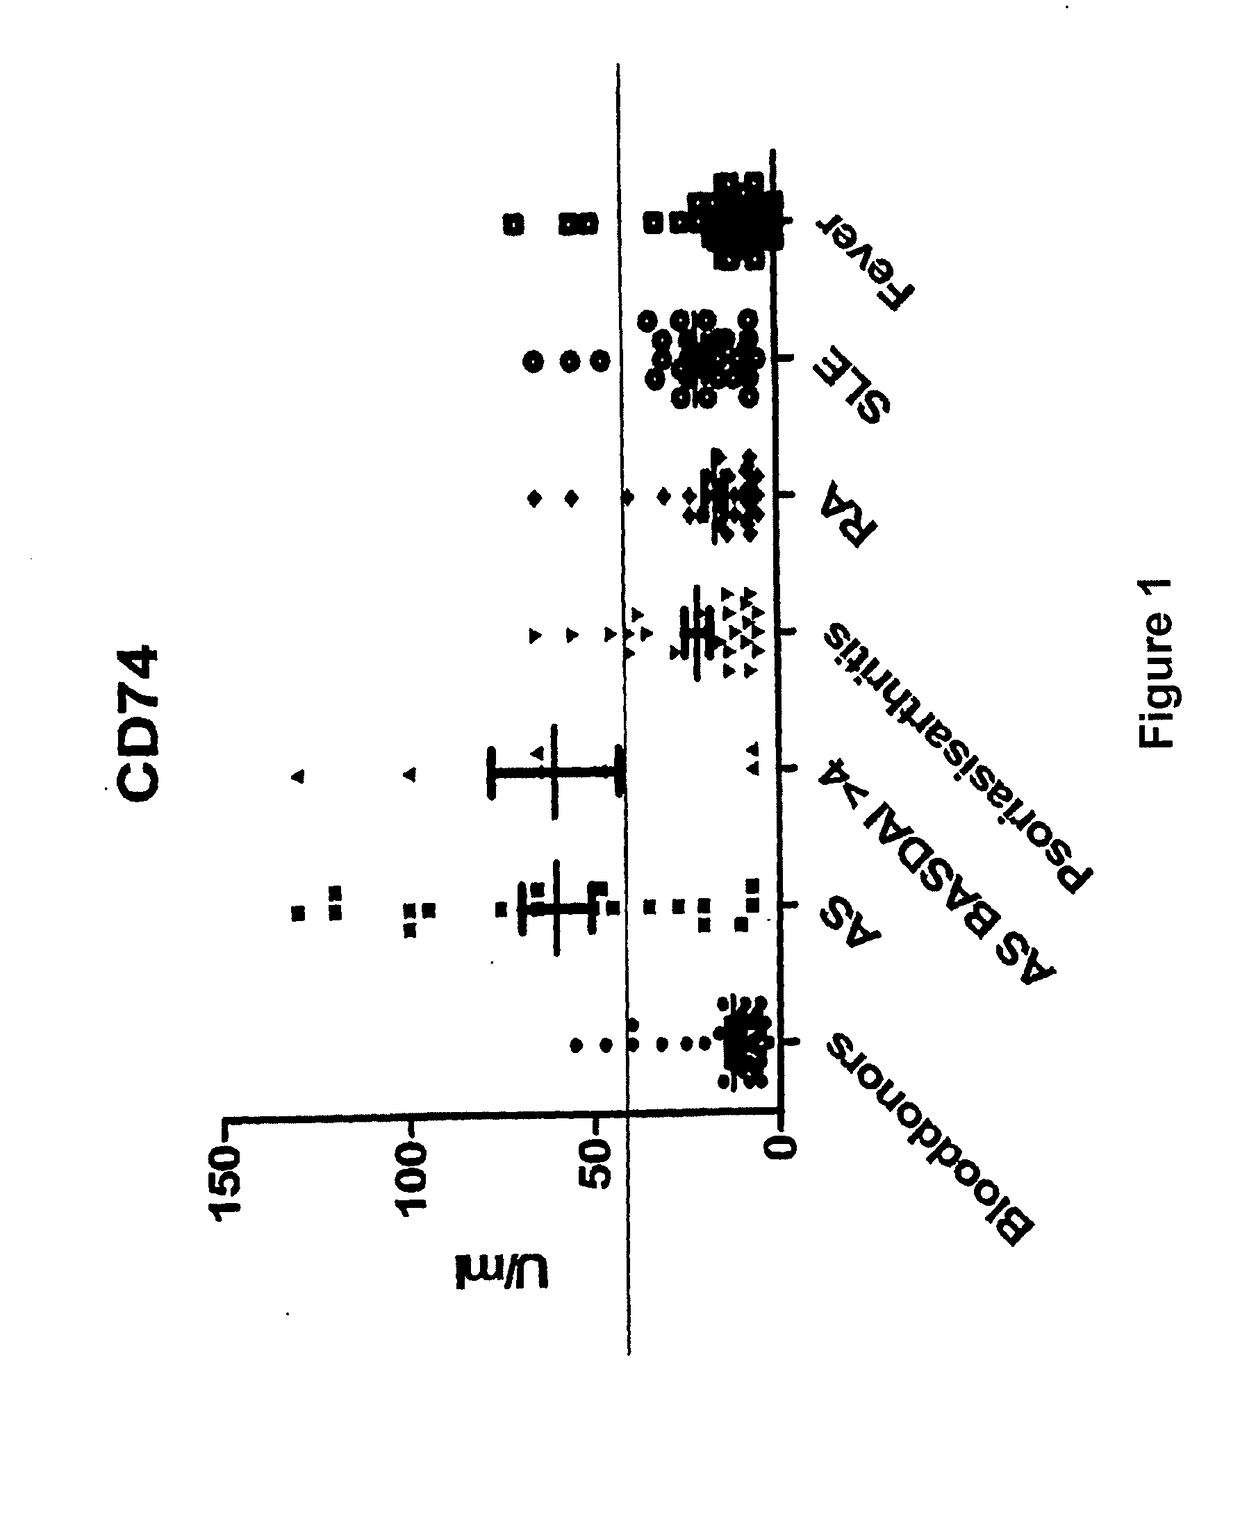 Methods and means for diagnosing spondylarthritis using autoantibody markers